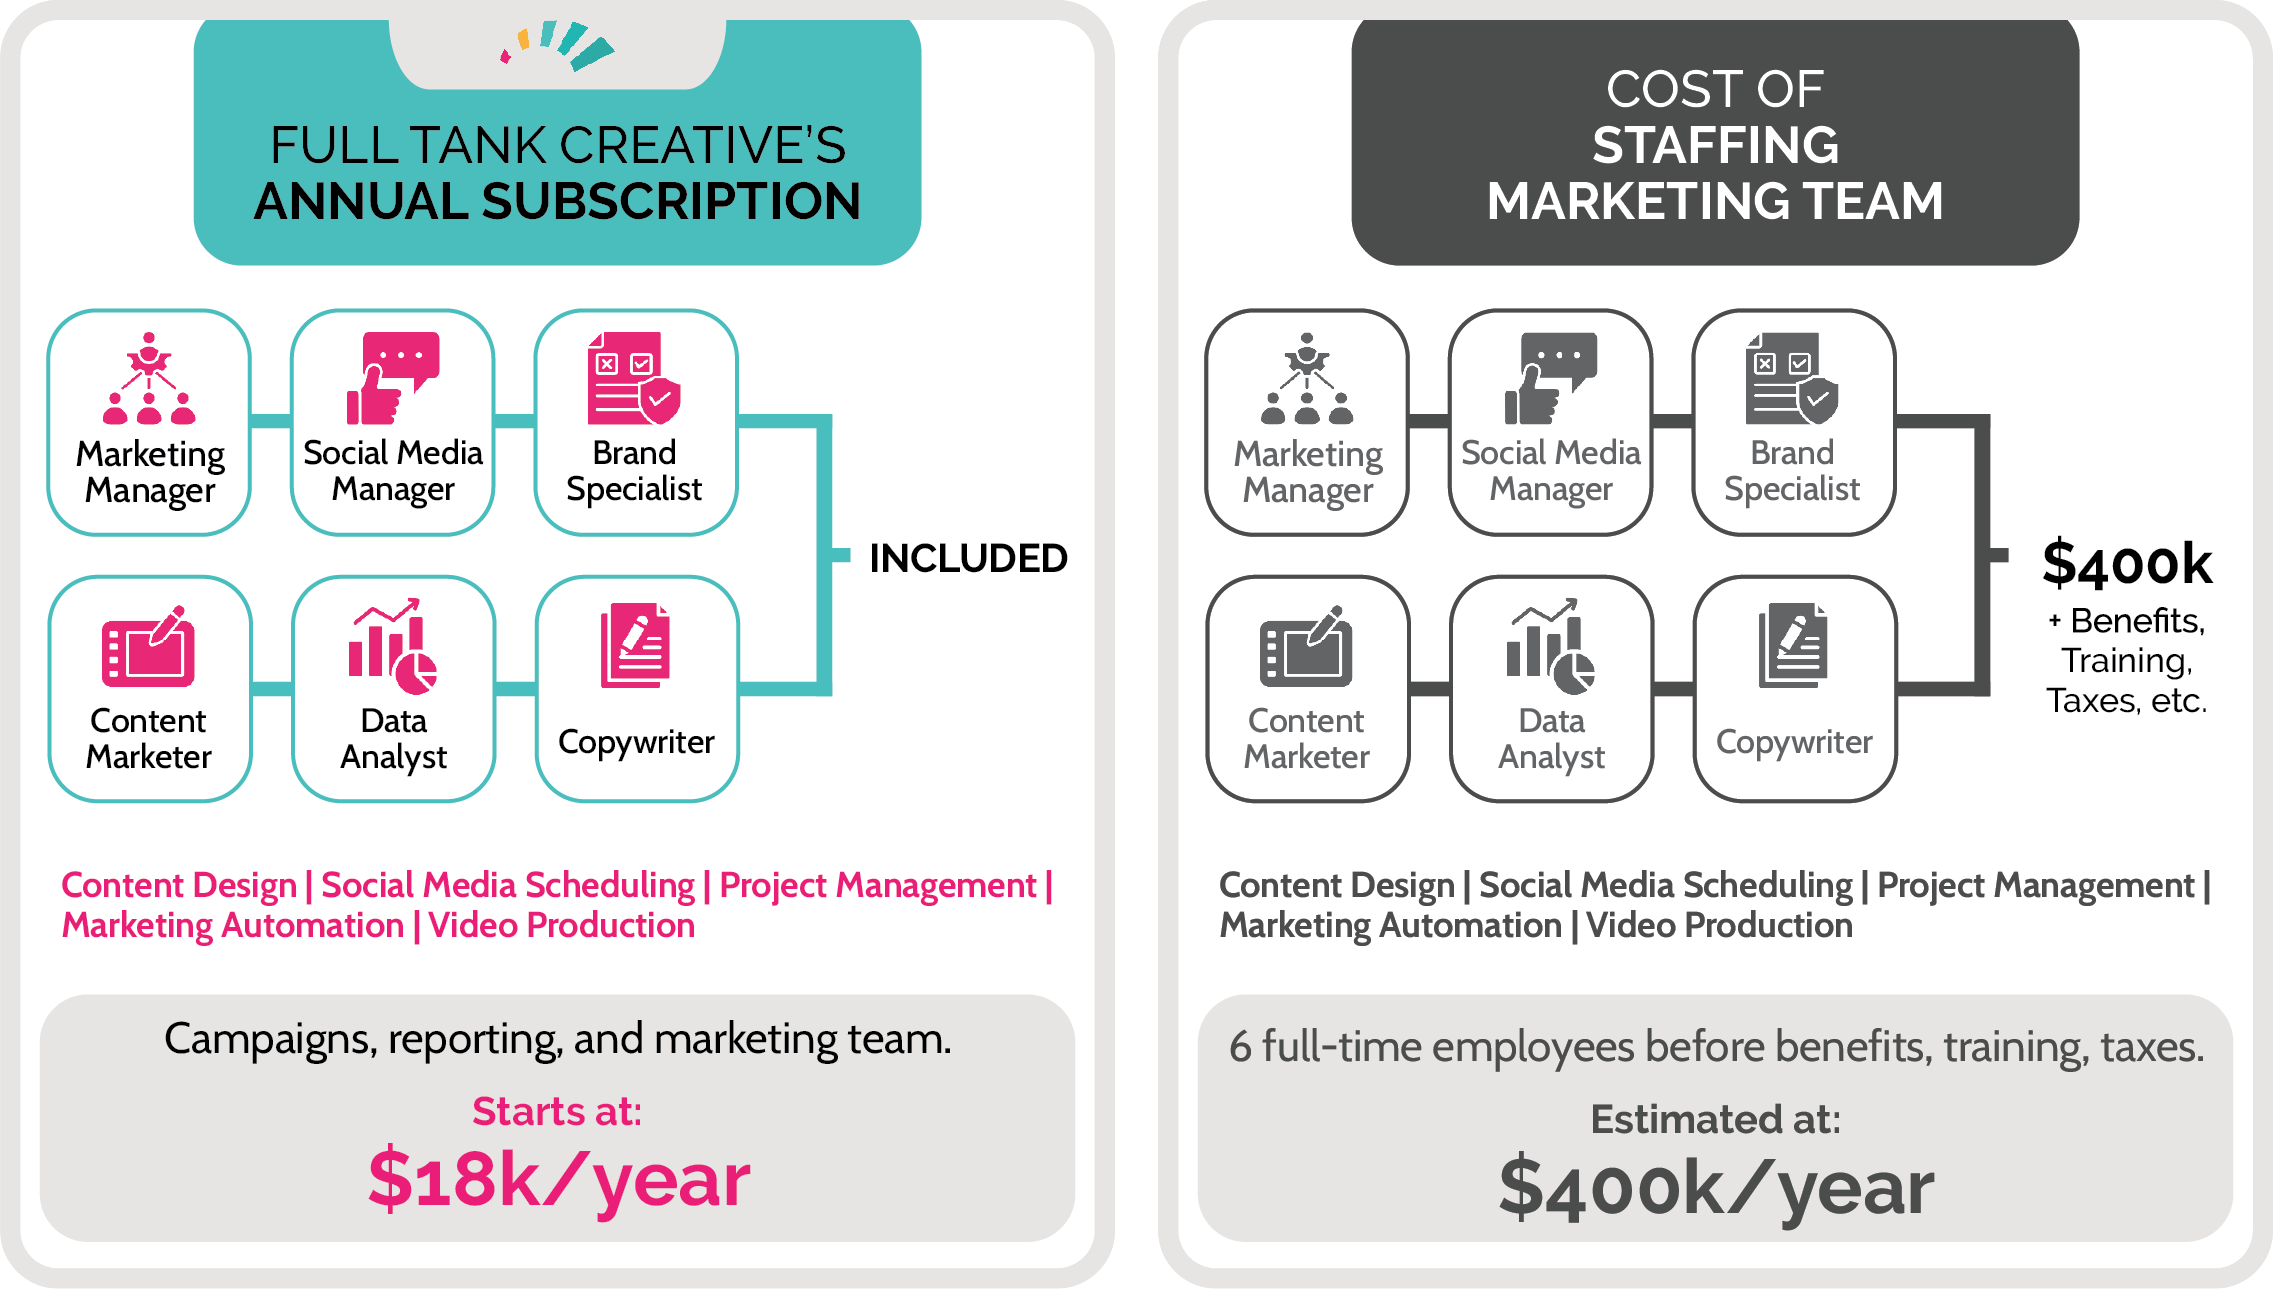 Full Tank Creative graphic showing the cost comparison of staffing a marketing team (6 full-time employees before benefits, training, taxes = $400K/year) vs. partnering with Full Tank Creative (Packages starting at $18K/year).